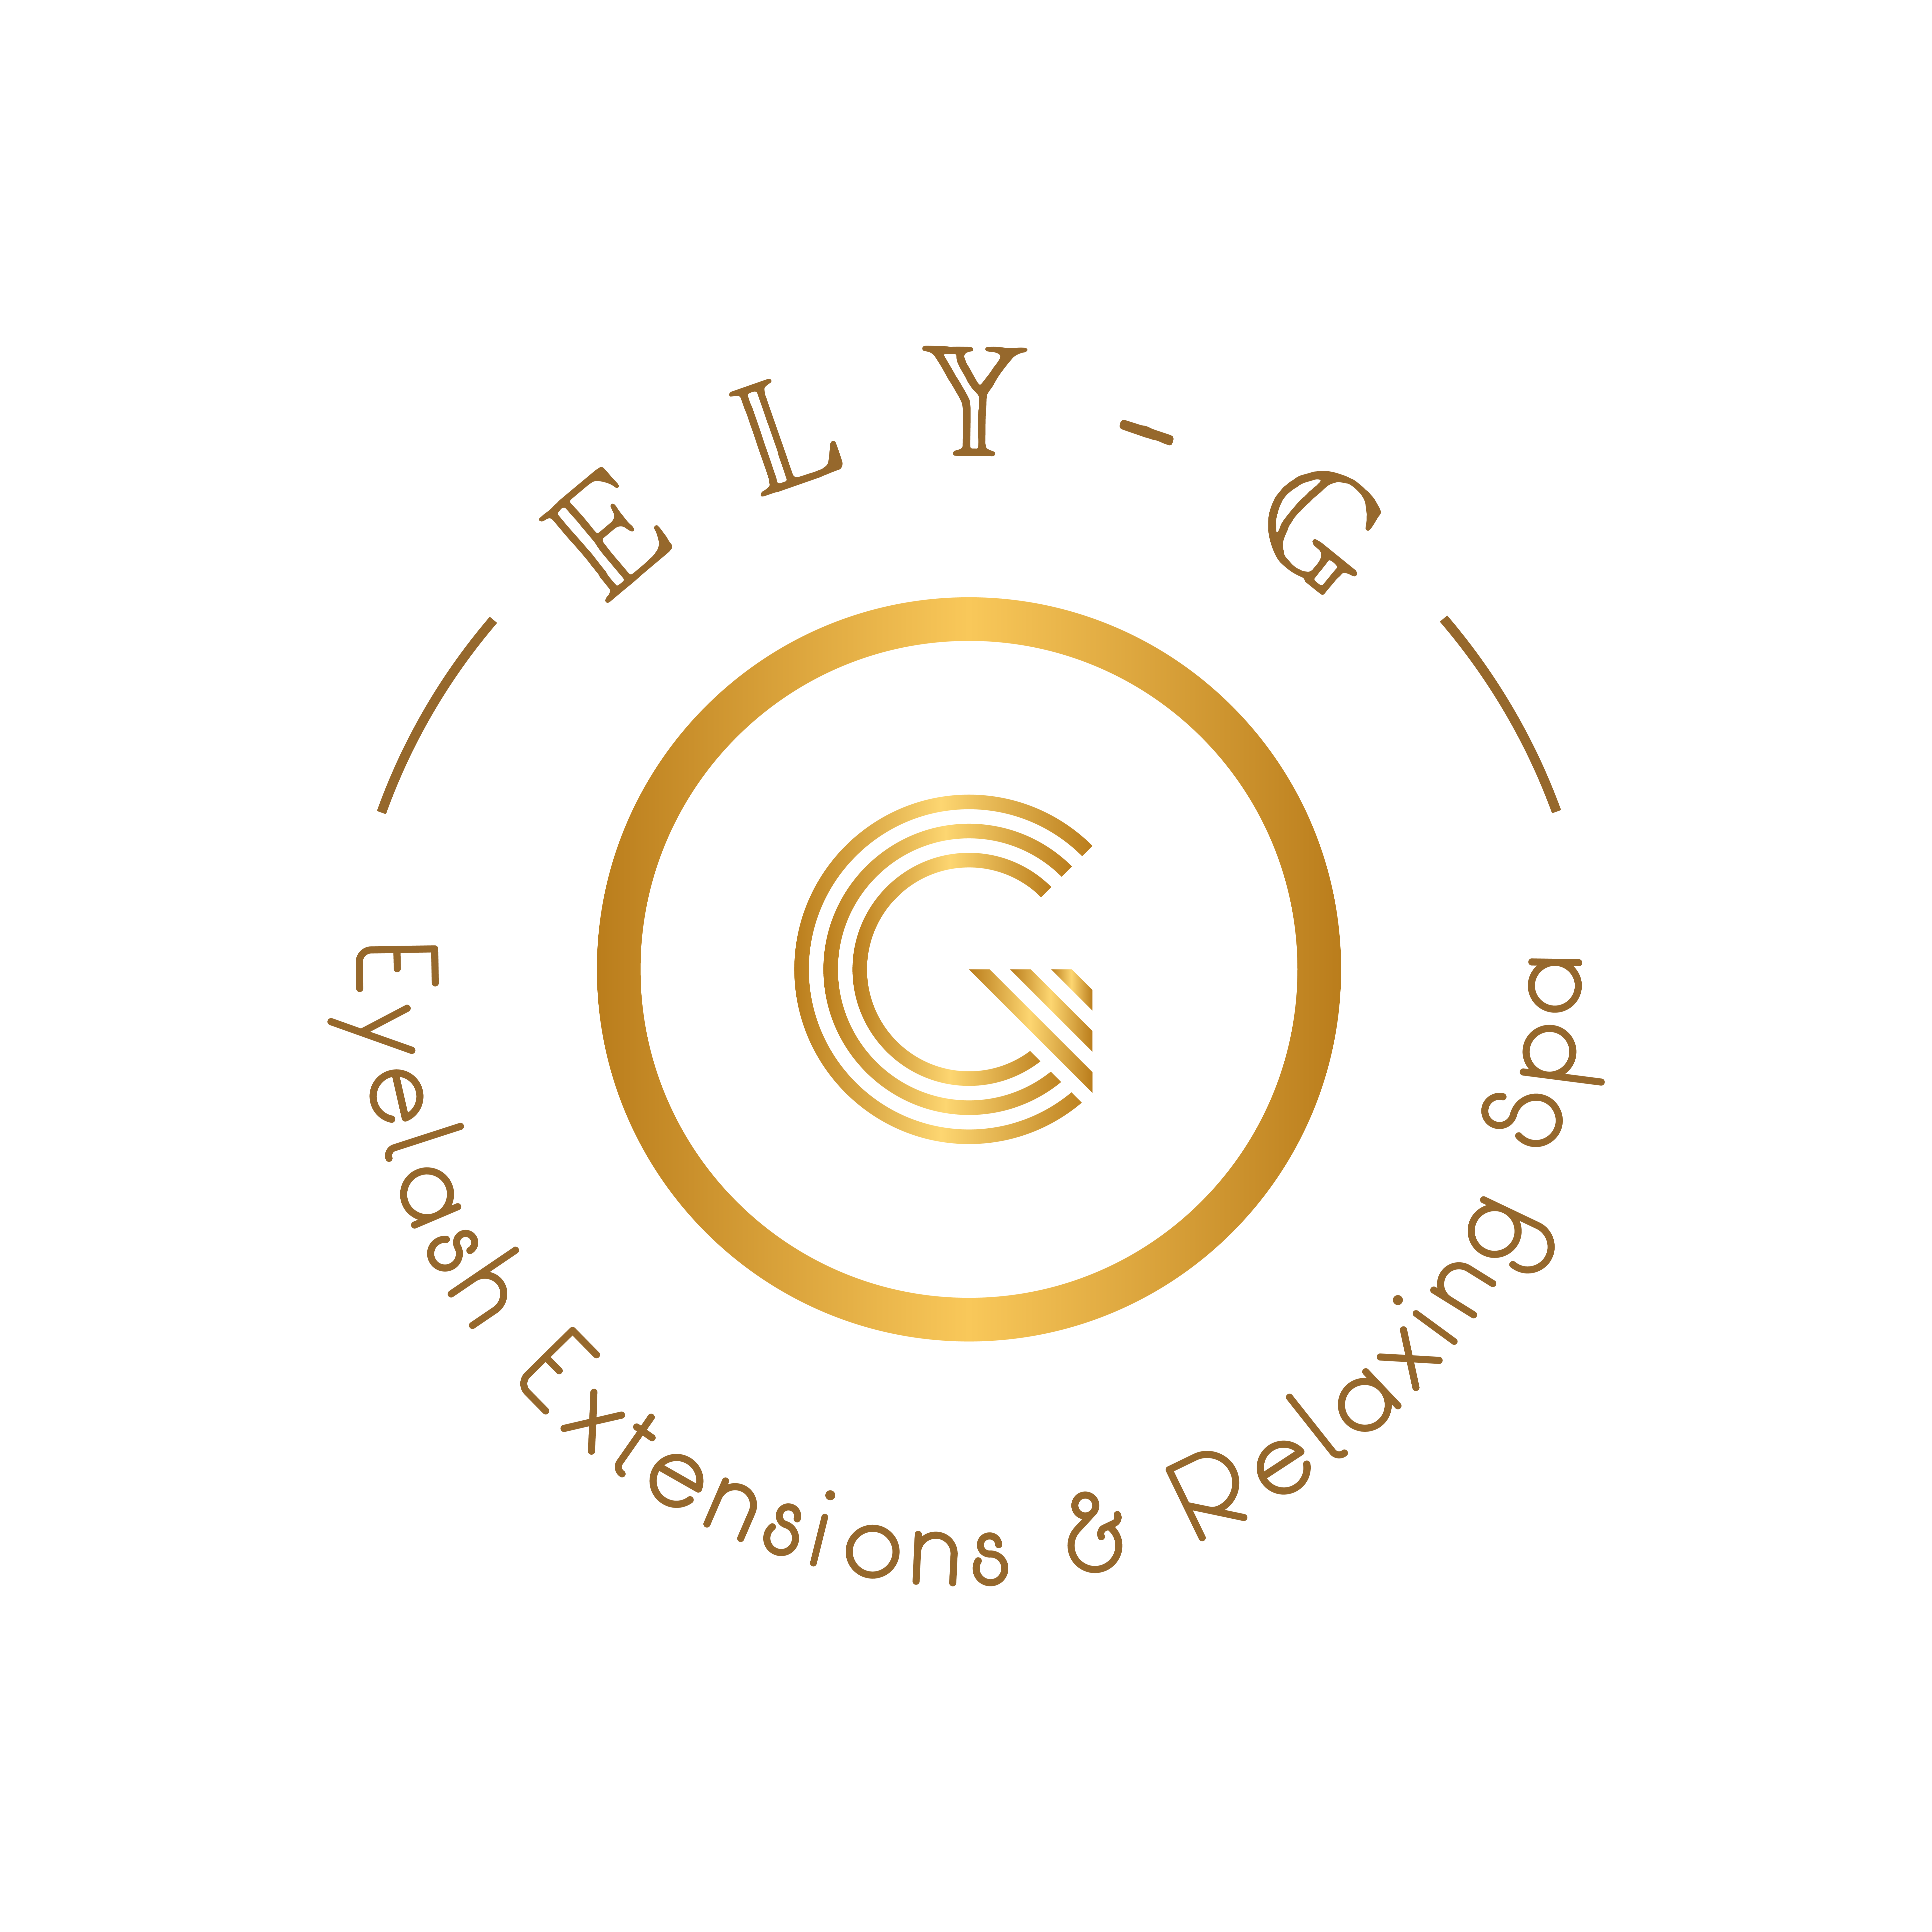 Ely-G Eyelash Extensions & Relaxing Spa - Bedford, NH 03110 - (603)709-5365 | ShowMeLocal.com